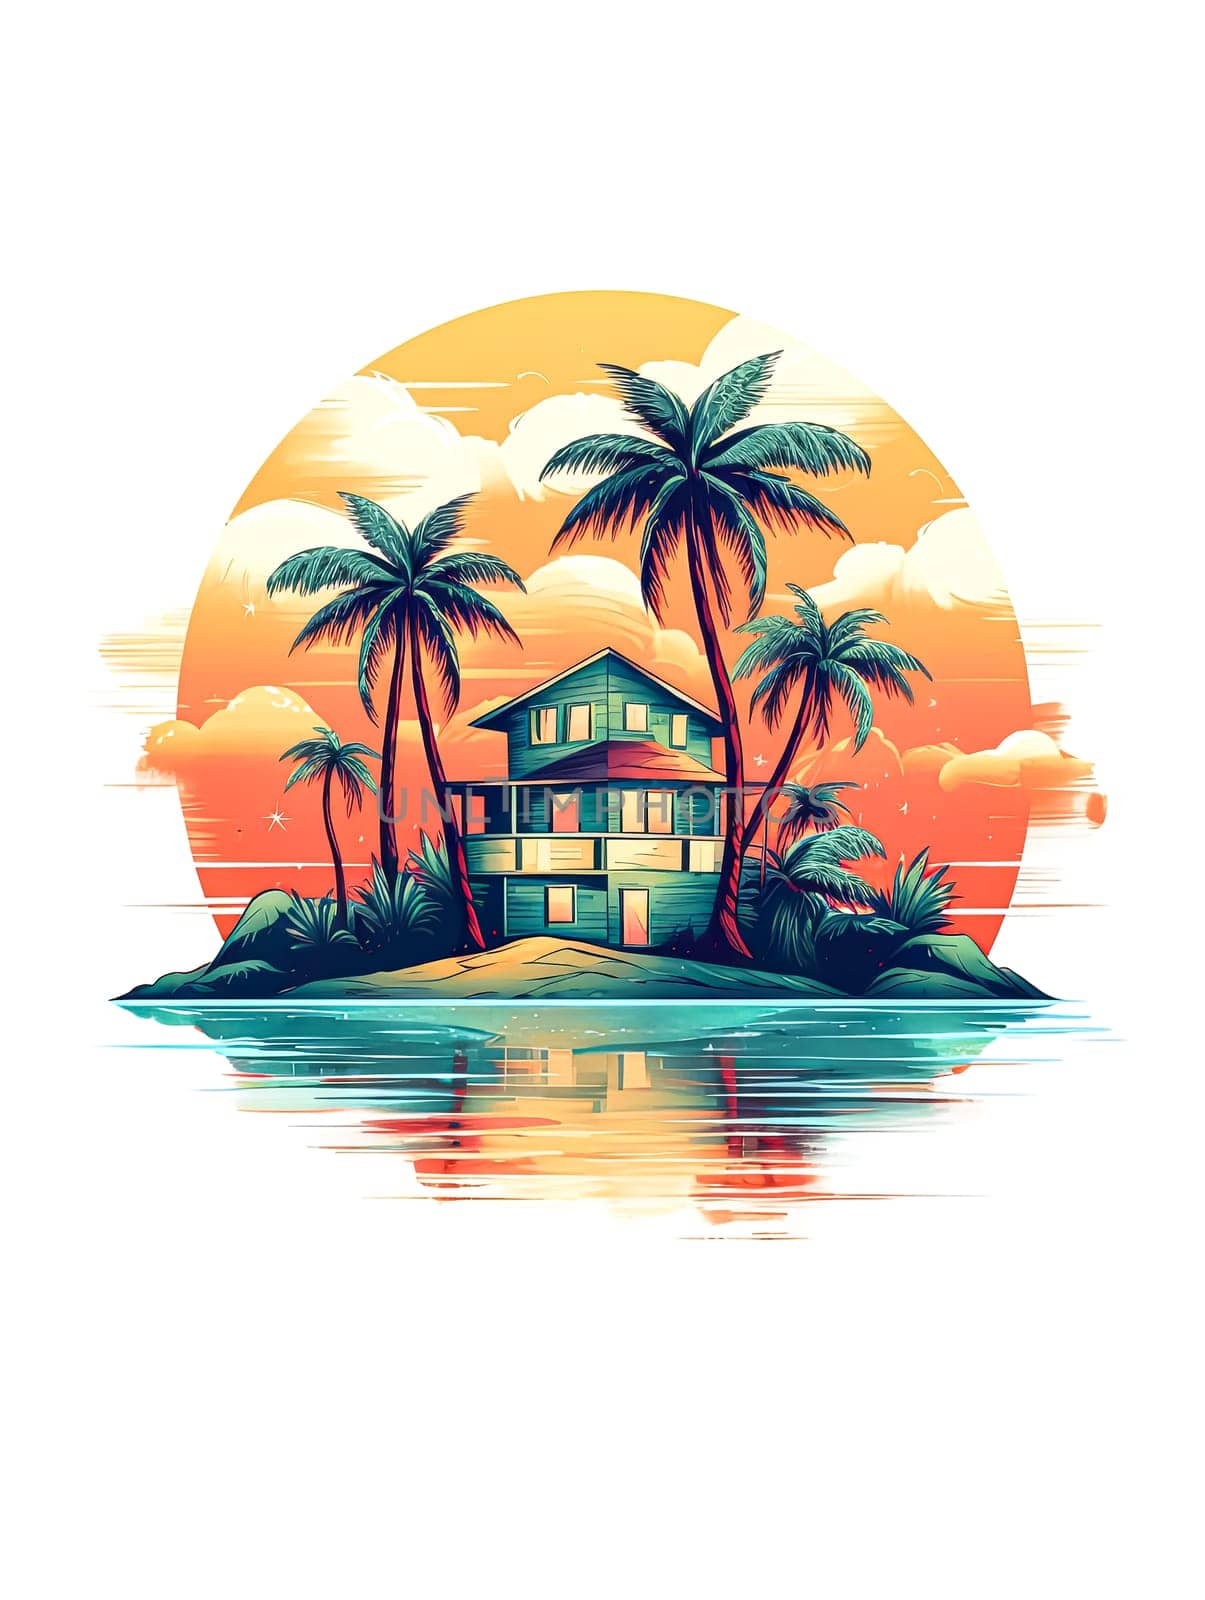 A house is on a small island in the ocean. The house is surrounded by palm trees. The sky is orange and the water is blue